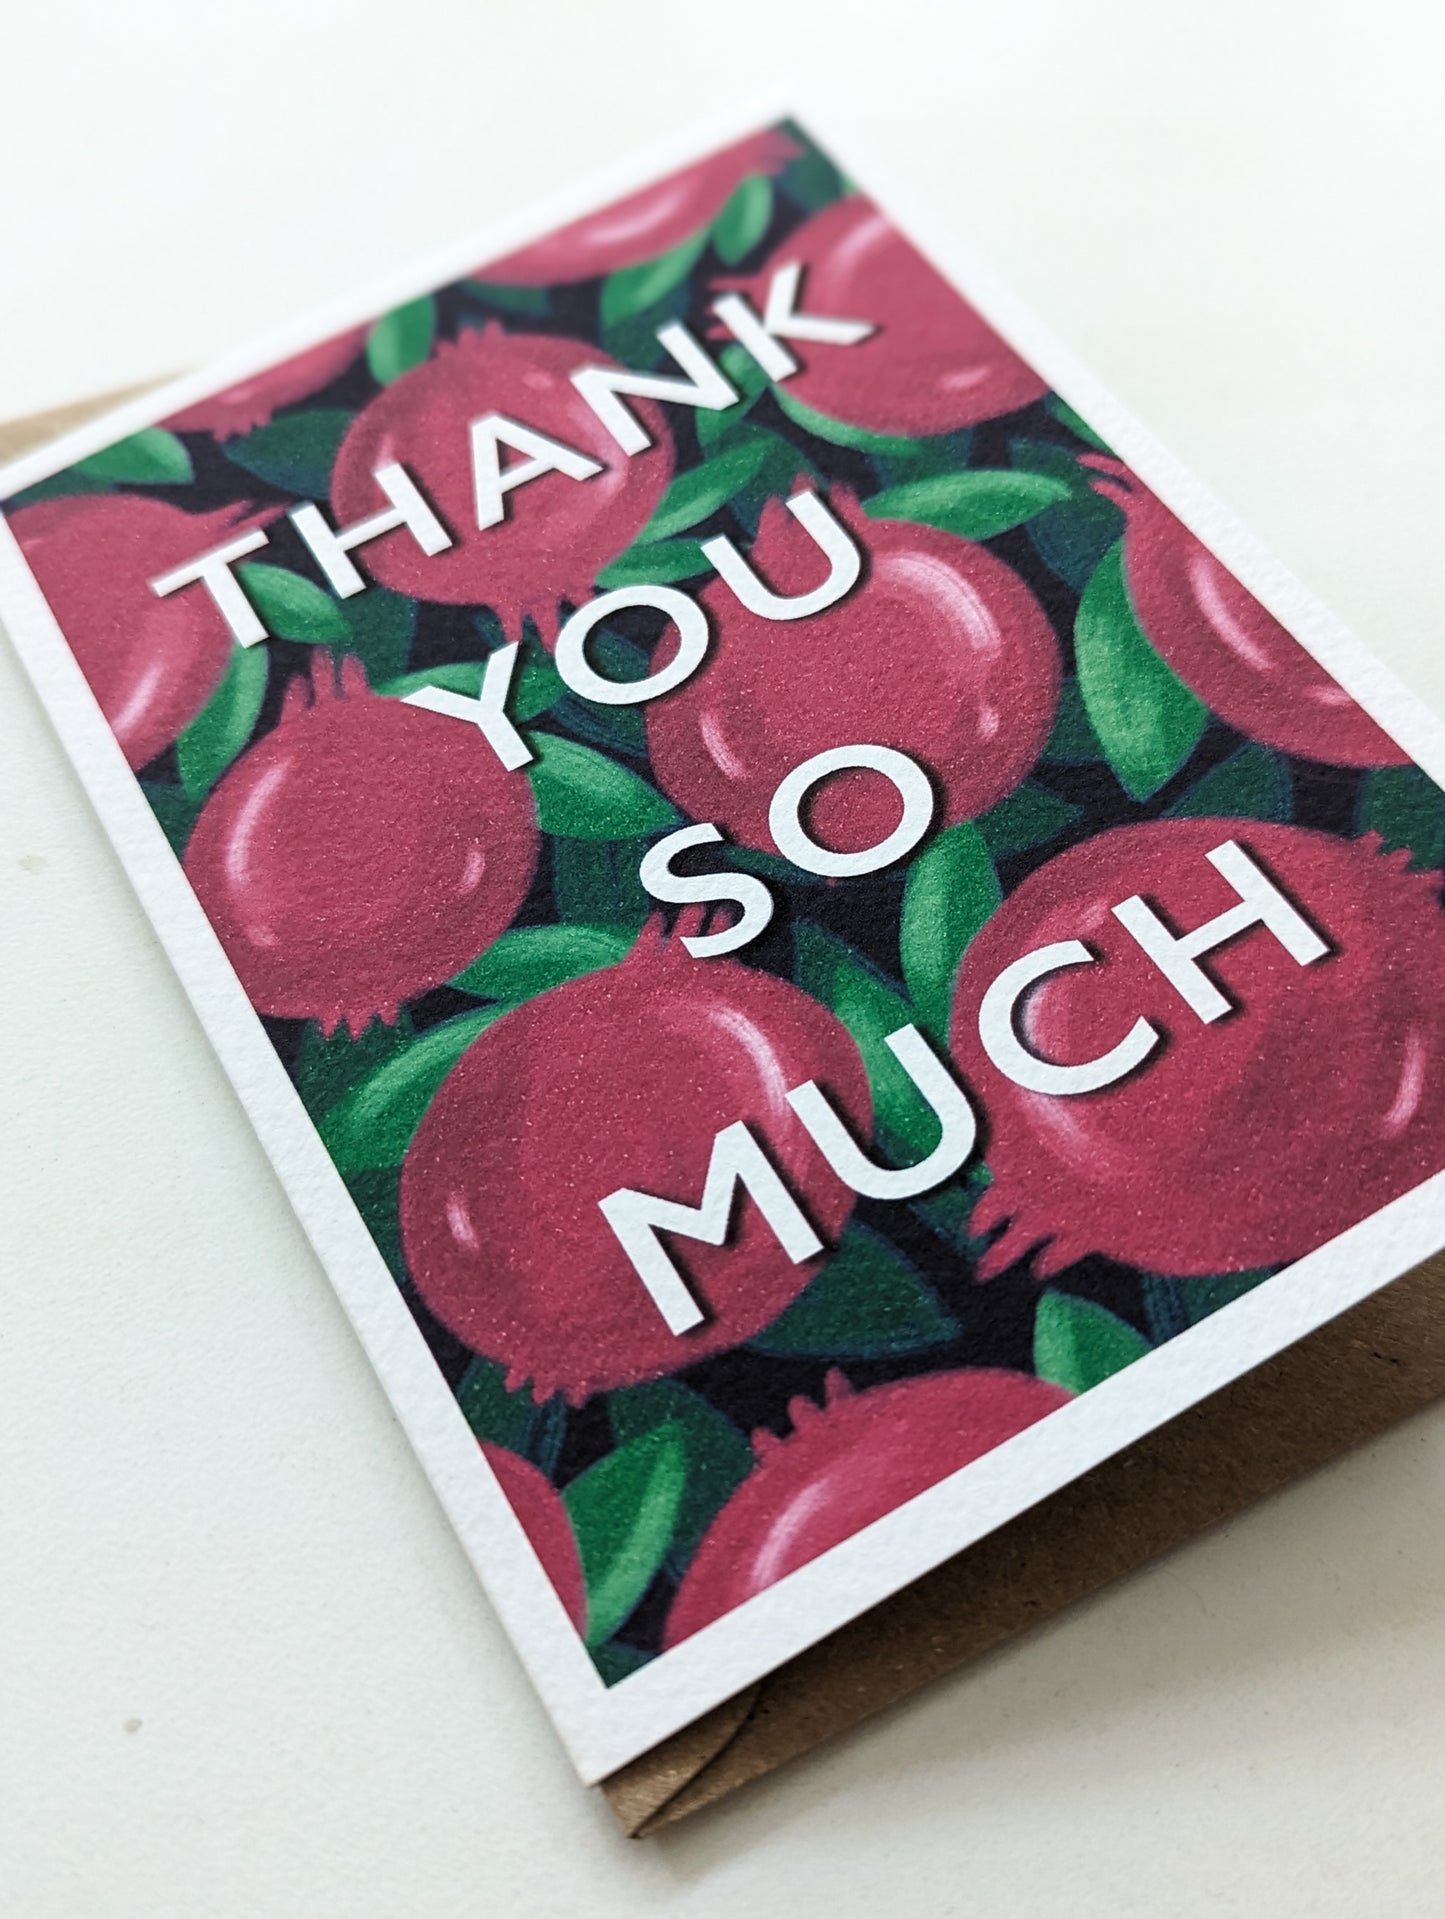 Thank You So Much – greeting card